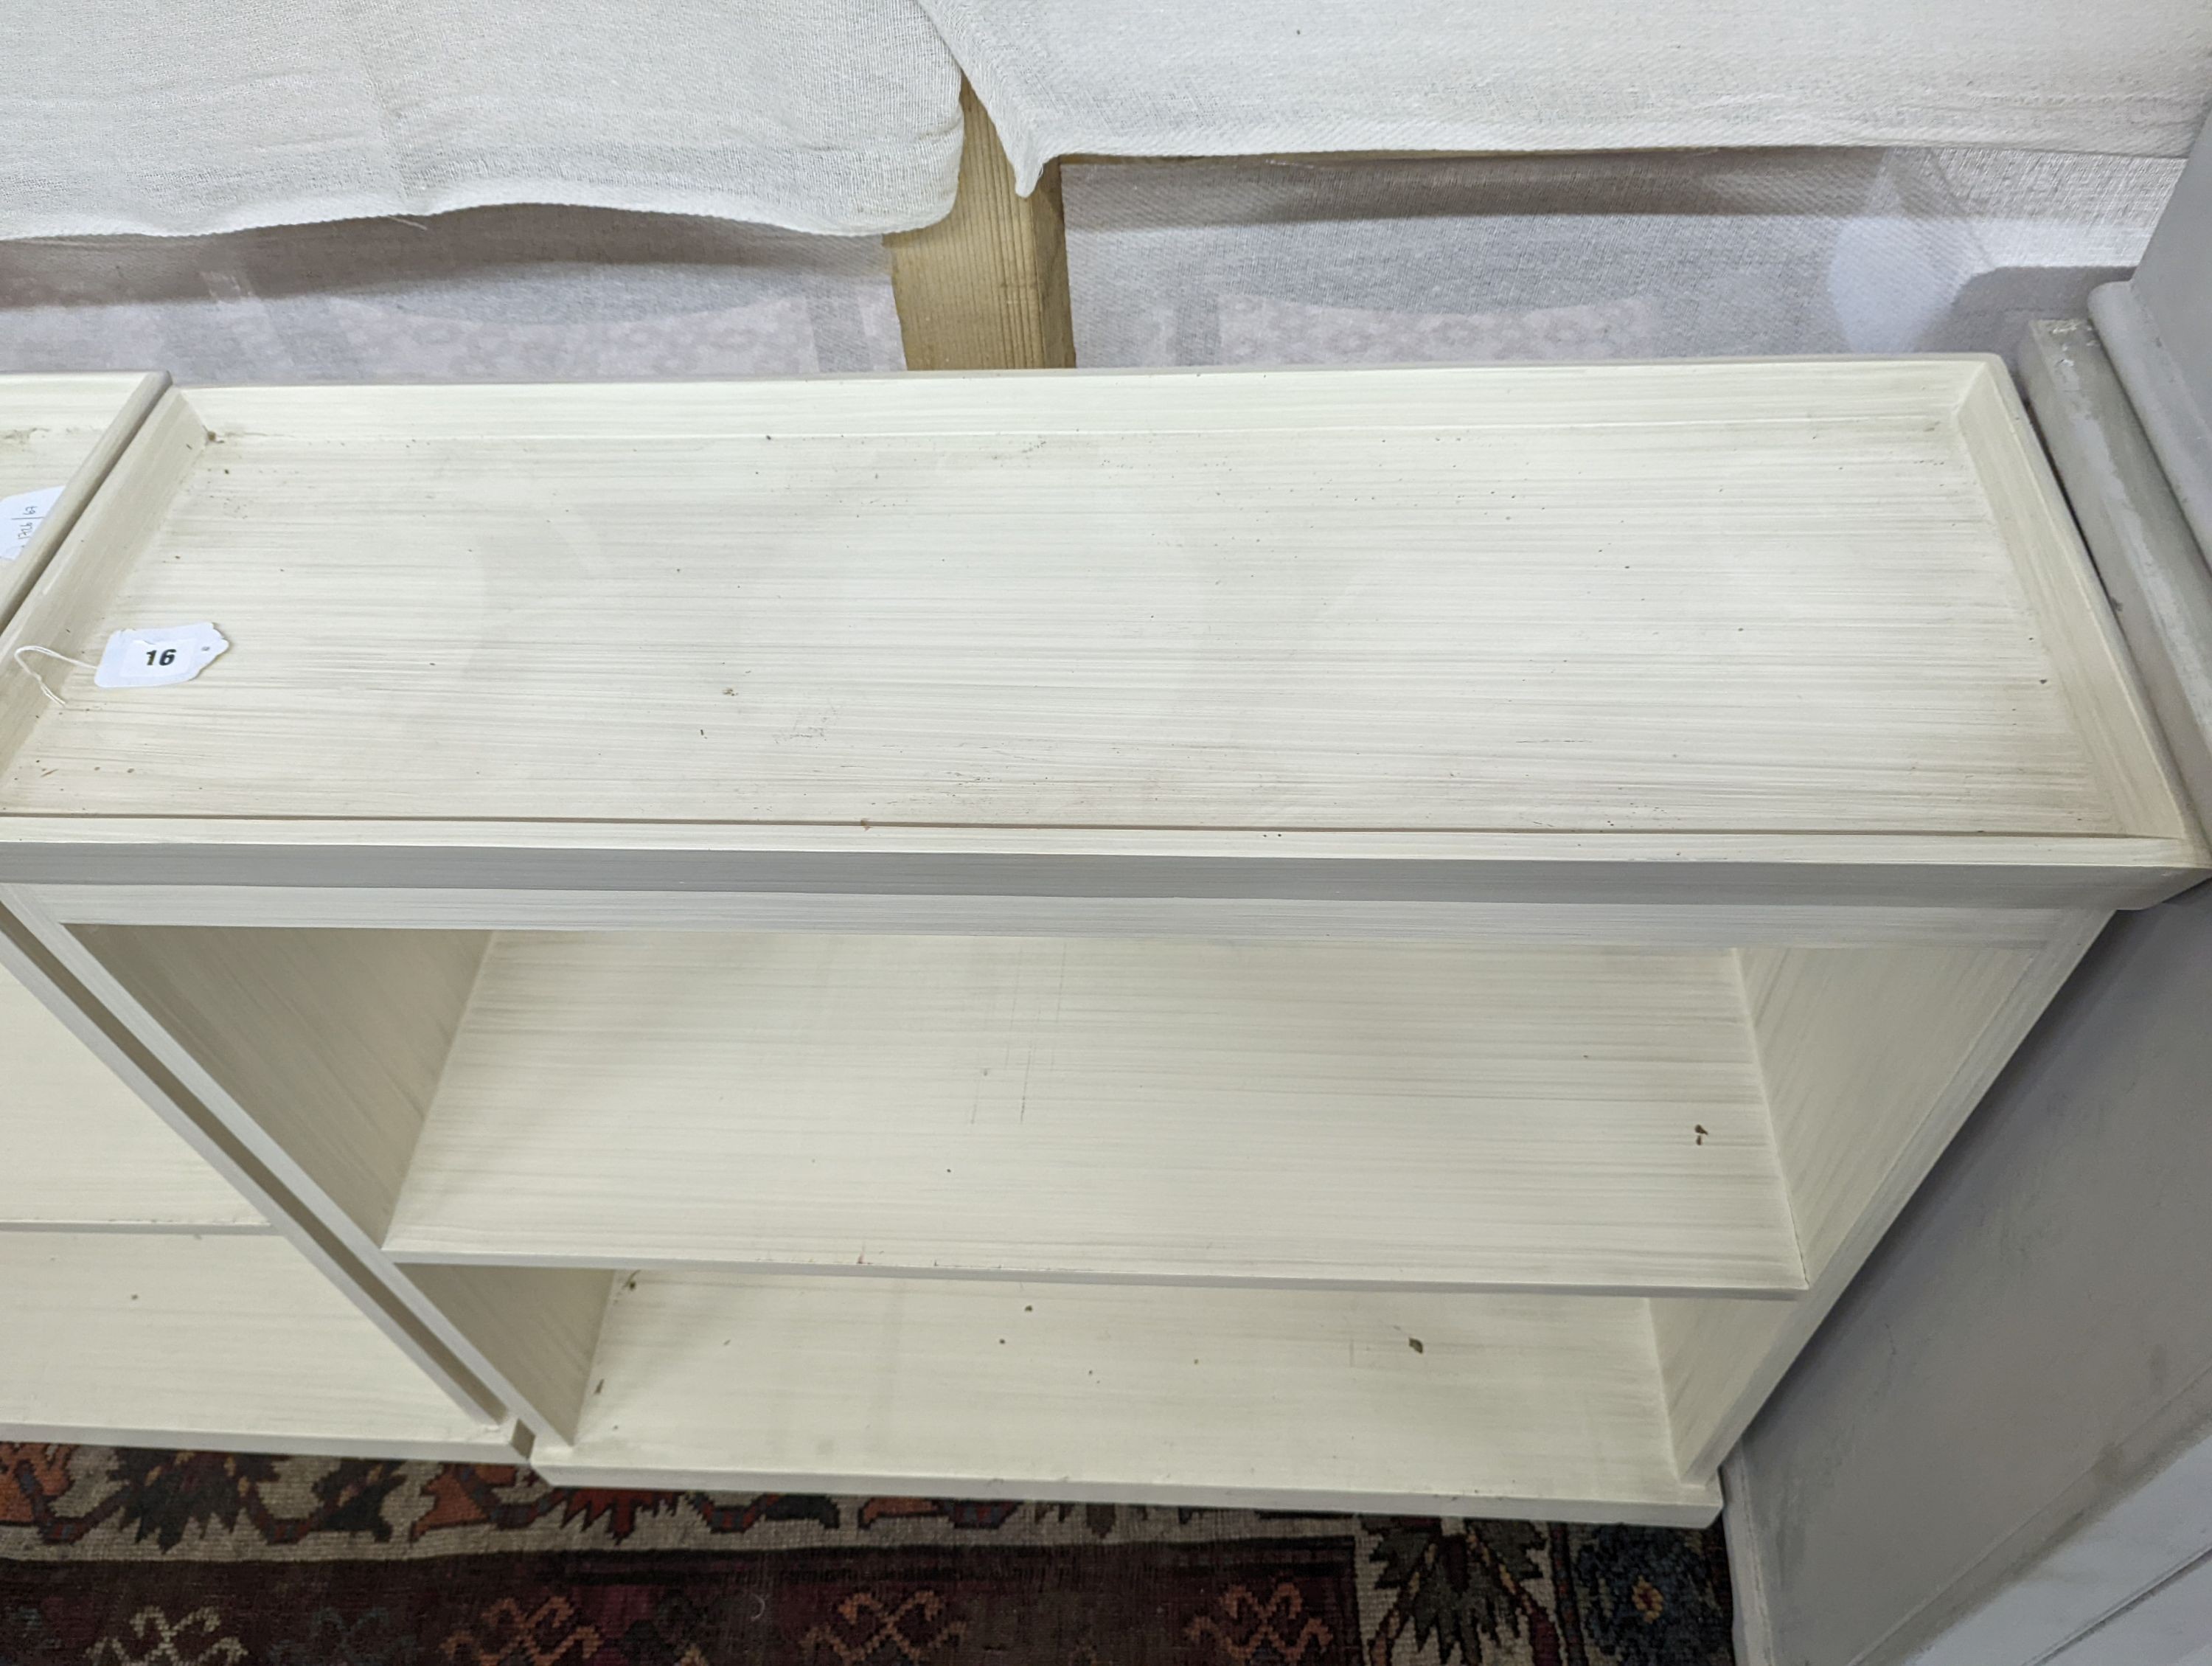 A pair of modern white painted dwarf open bookcases, length 90cm, depth 30cm, height 82cm